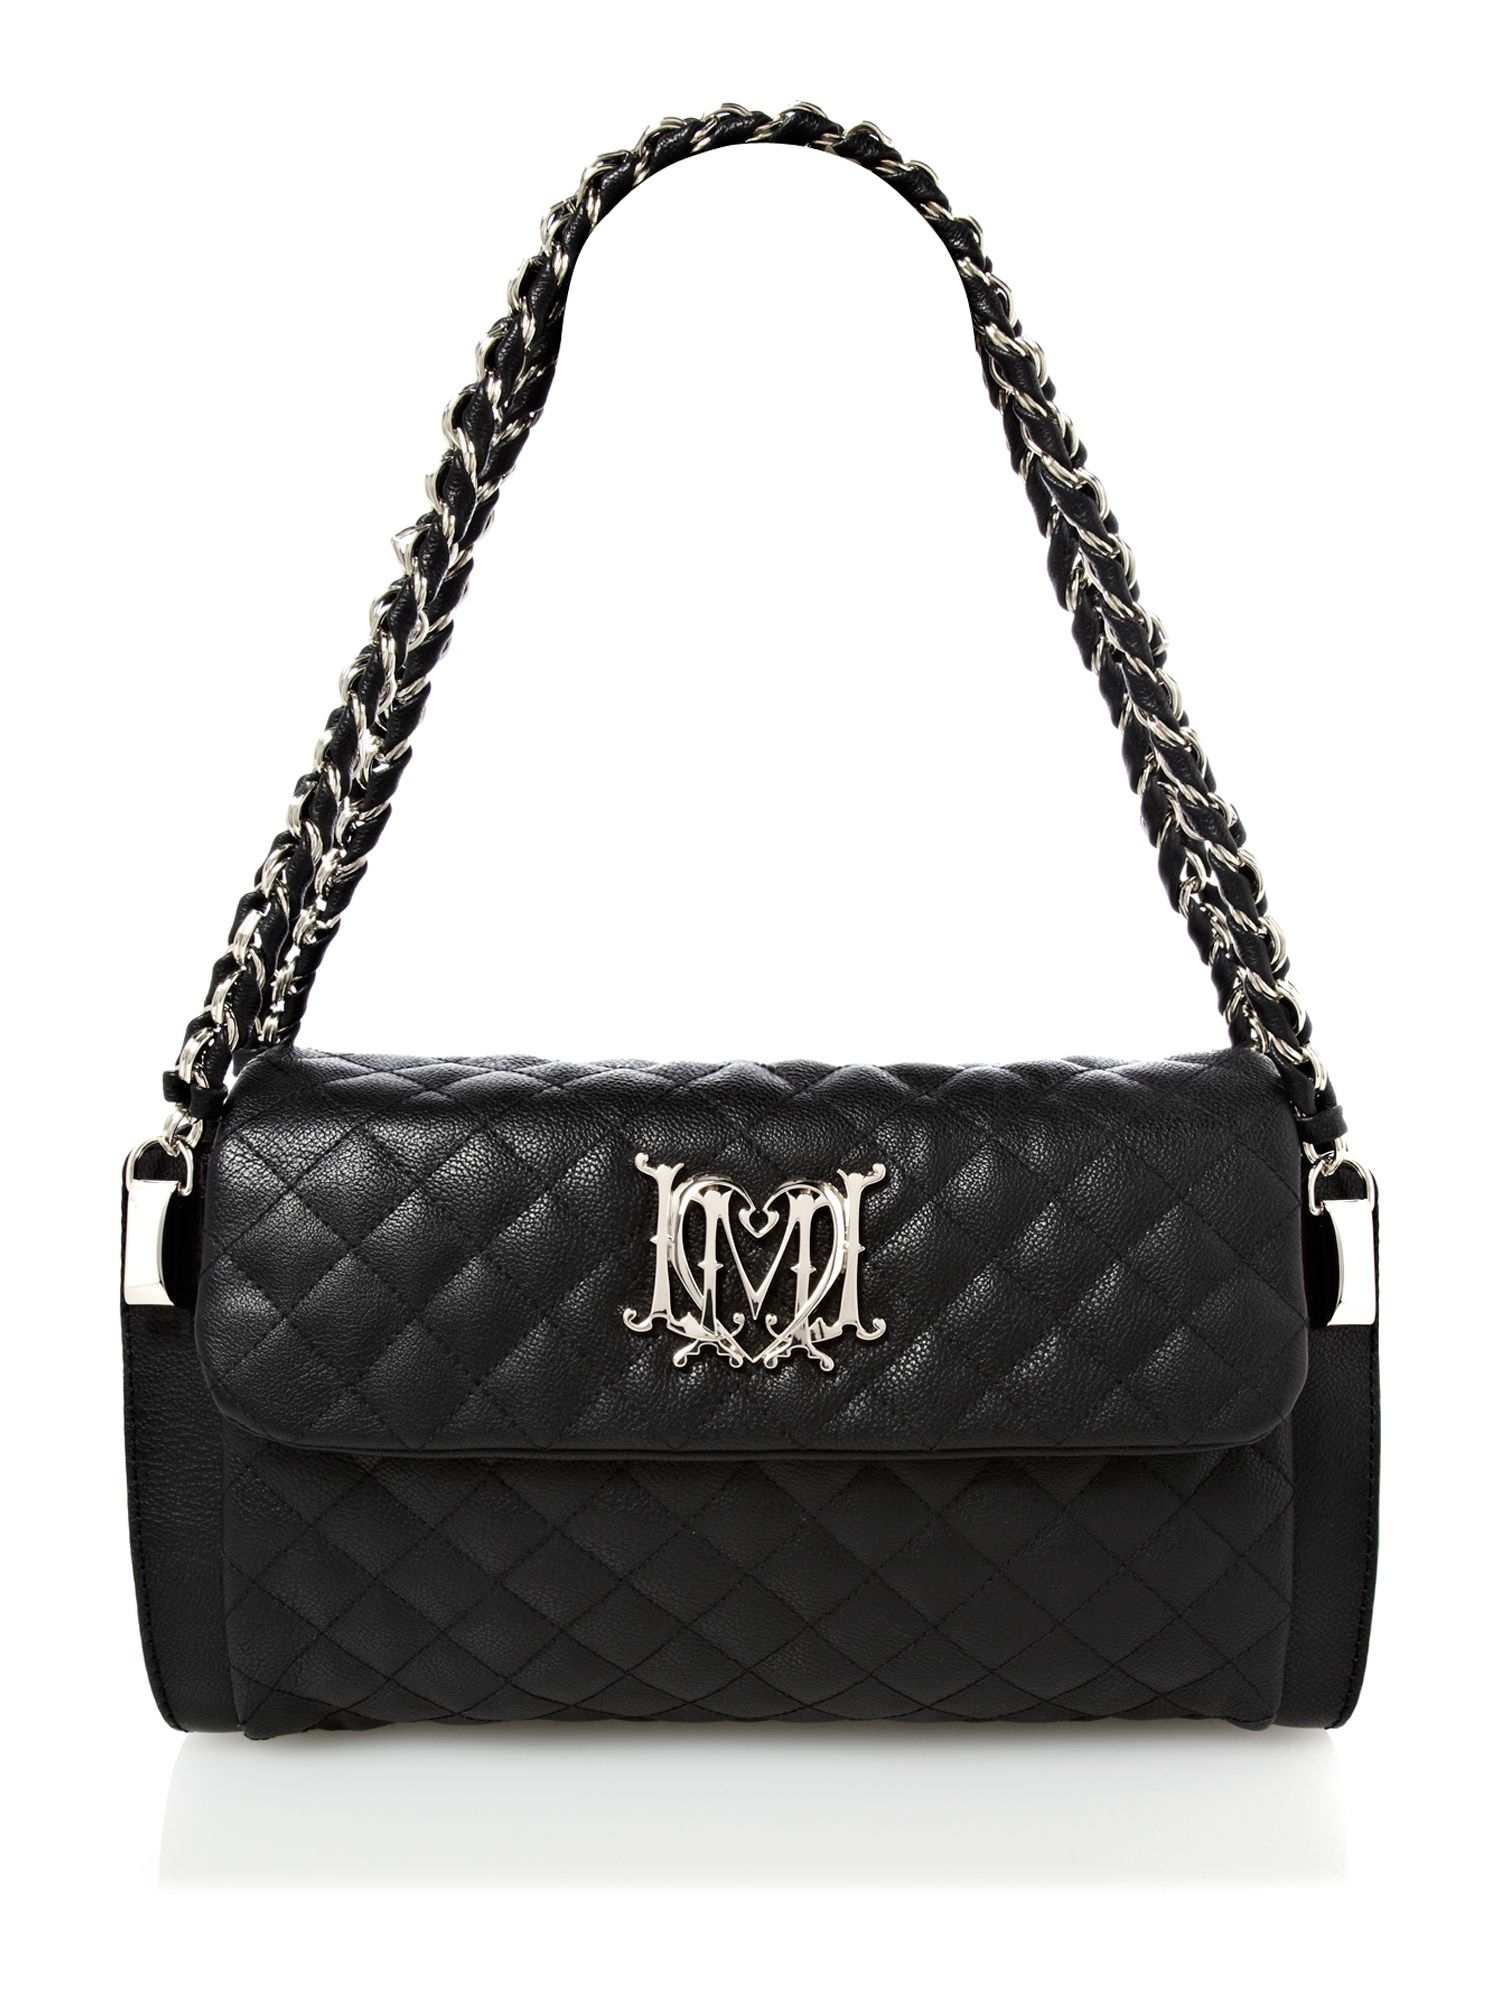 Love Moschino Modern Quilted Shoulder Bag in Black | Lyst